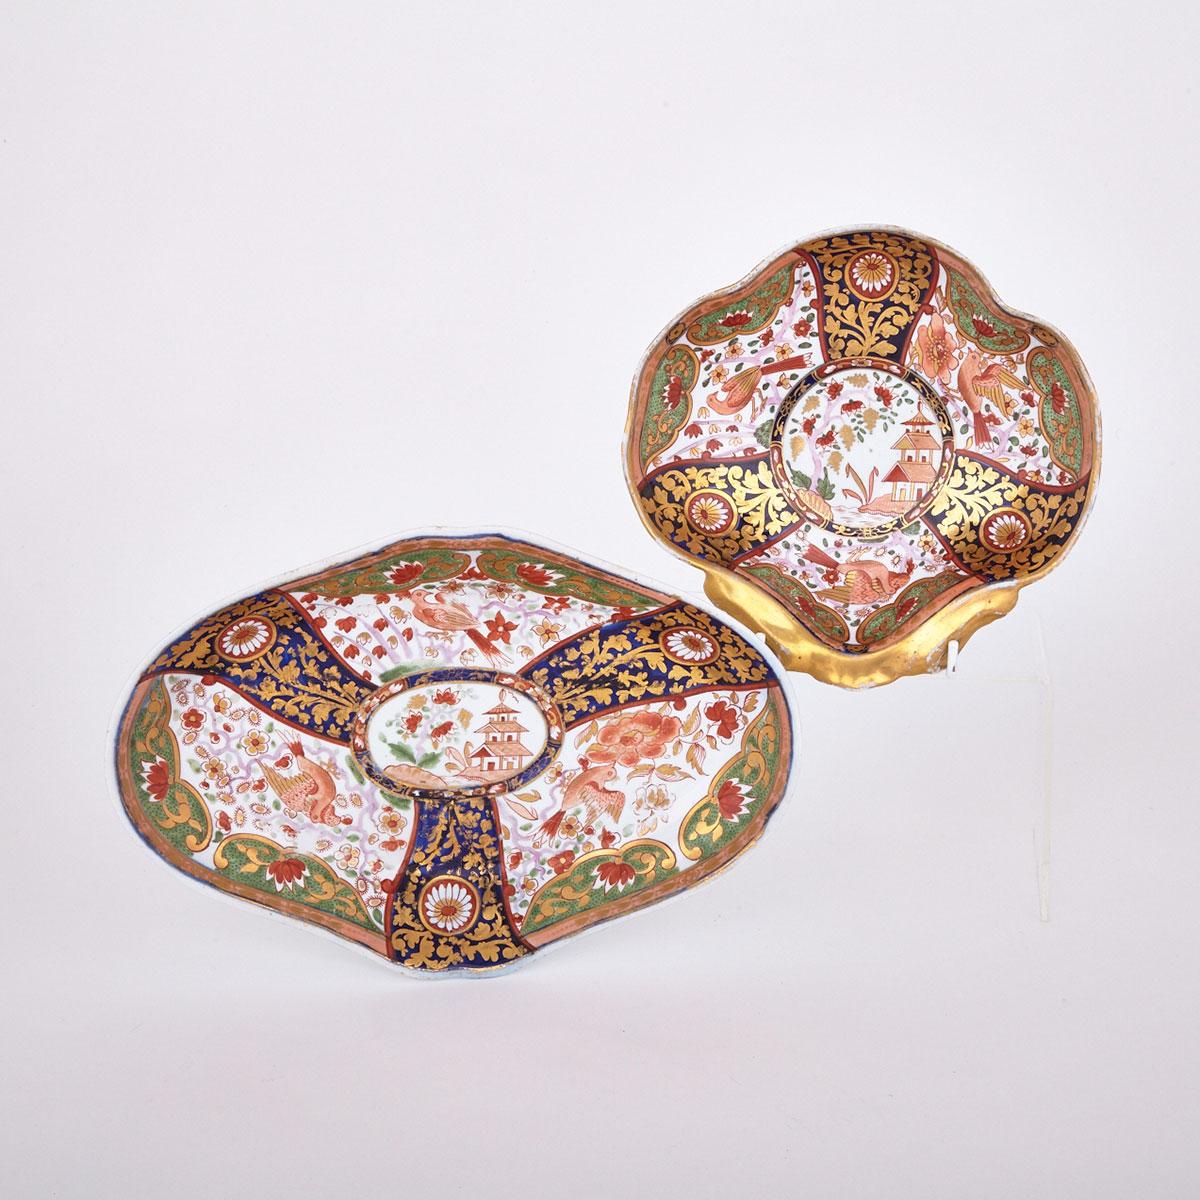 Two English Porcelain Japan Style Dessert Dishes, early 19th century